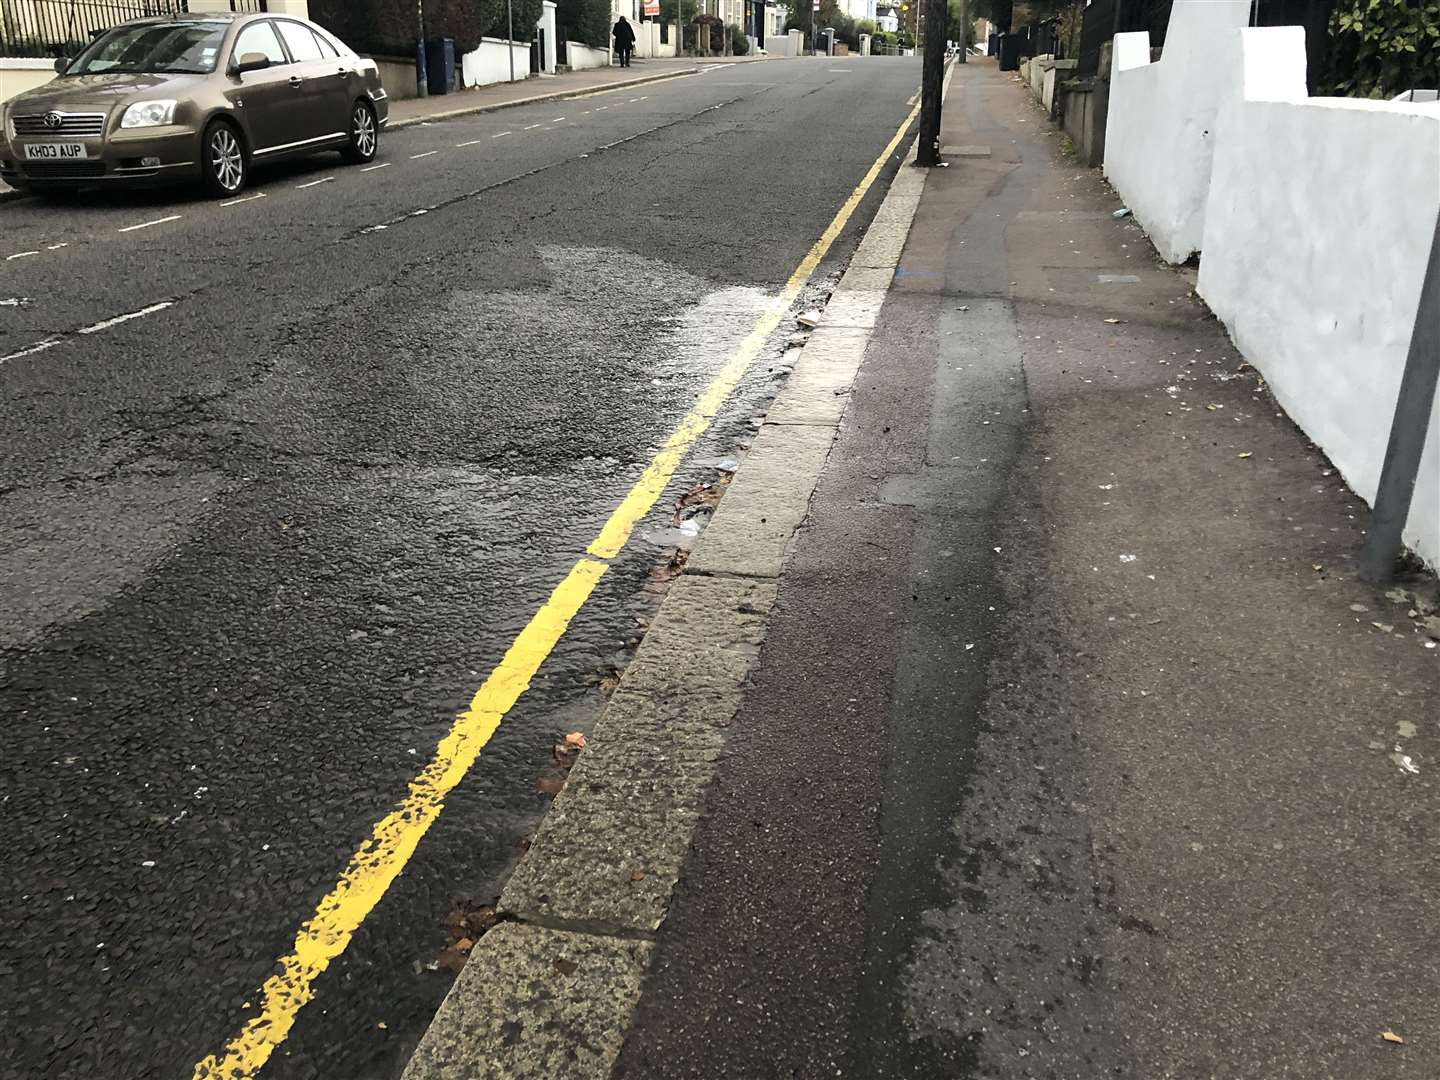 The water is running down the side of the kerb